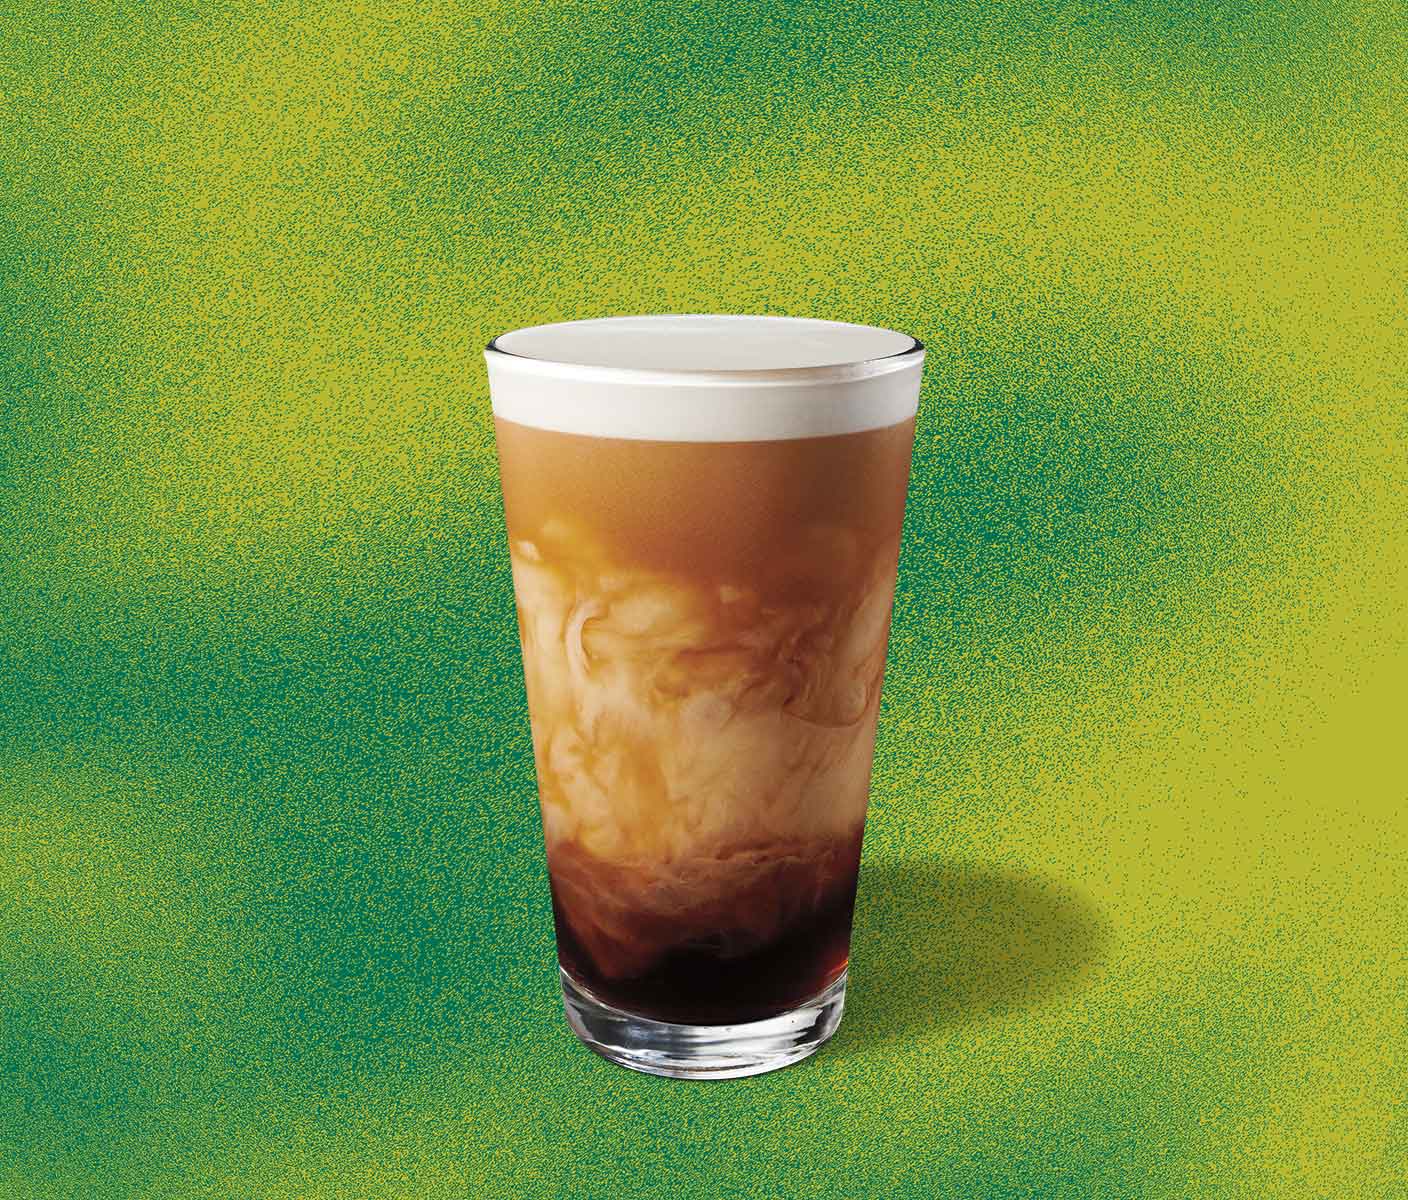 Cold coffee with creamy marbling in a tall glass.